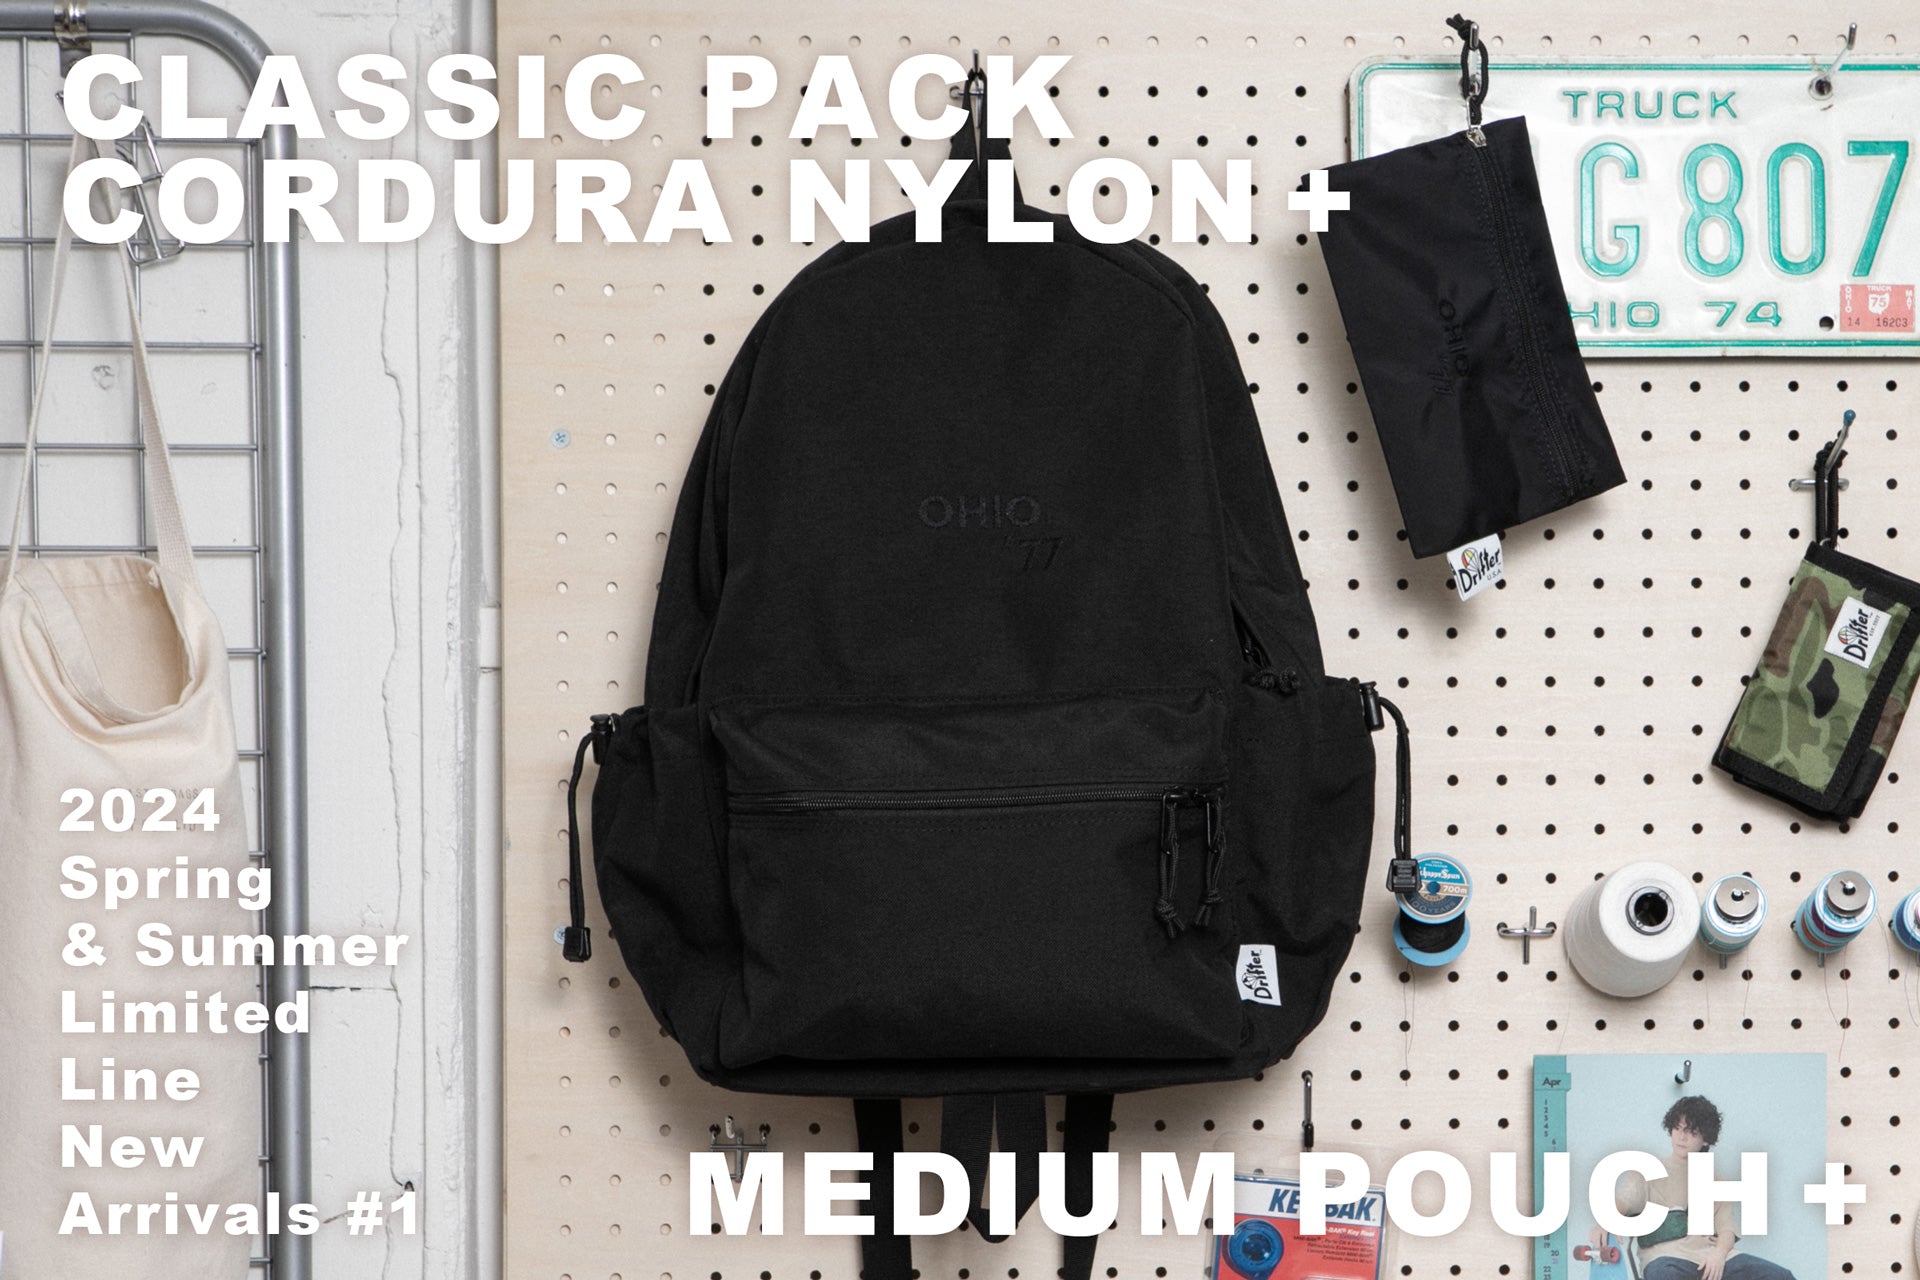 【CLASSIC PACK CORDURA NYLON + & MEDIUM POUCH +】24SS Limited Line New Arrivals #1 / 公式オンライン限定販売モデル新作レビュー